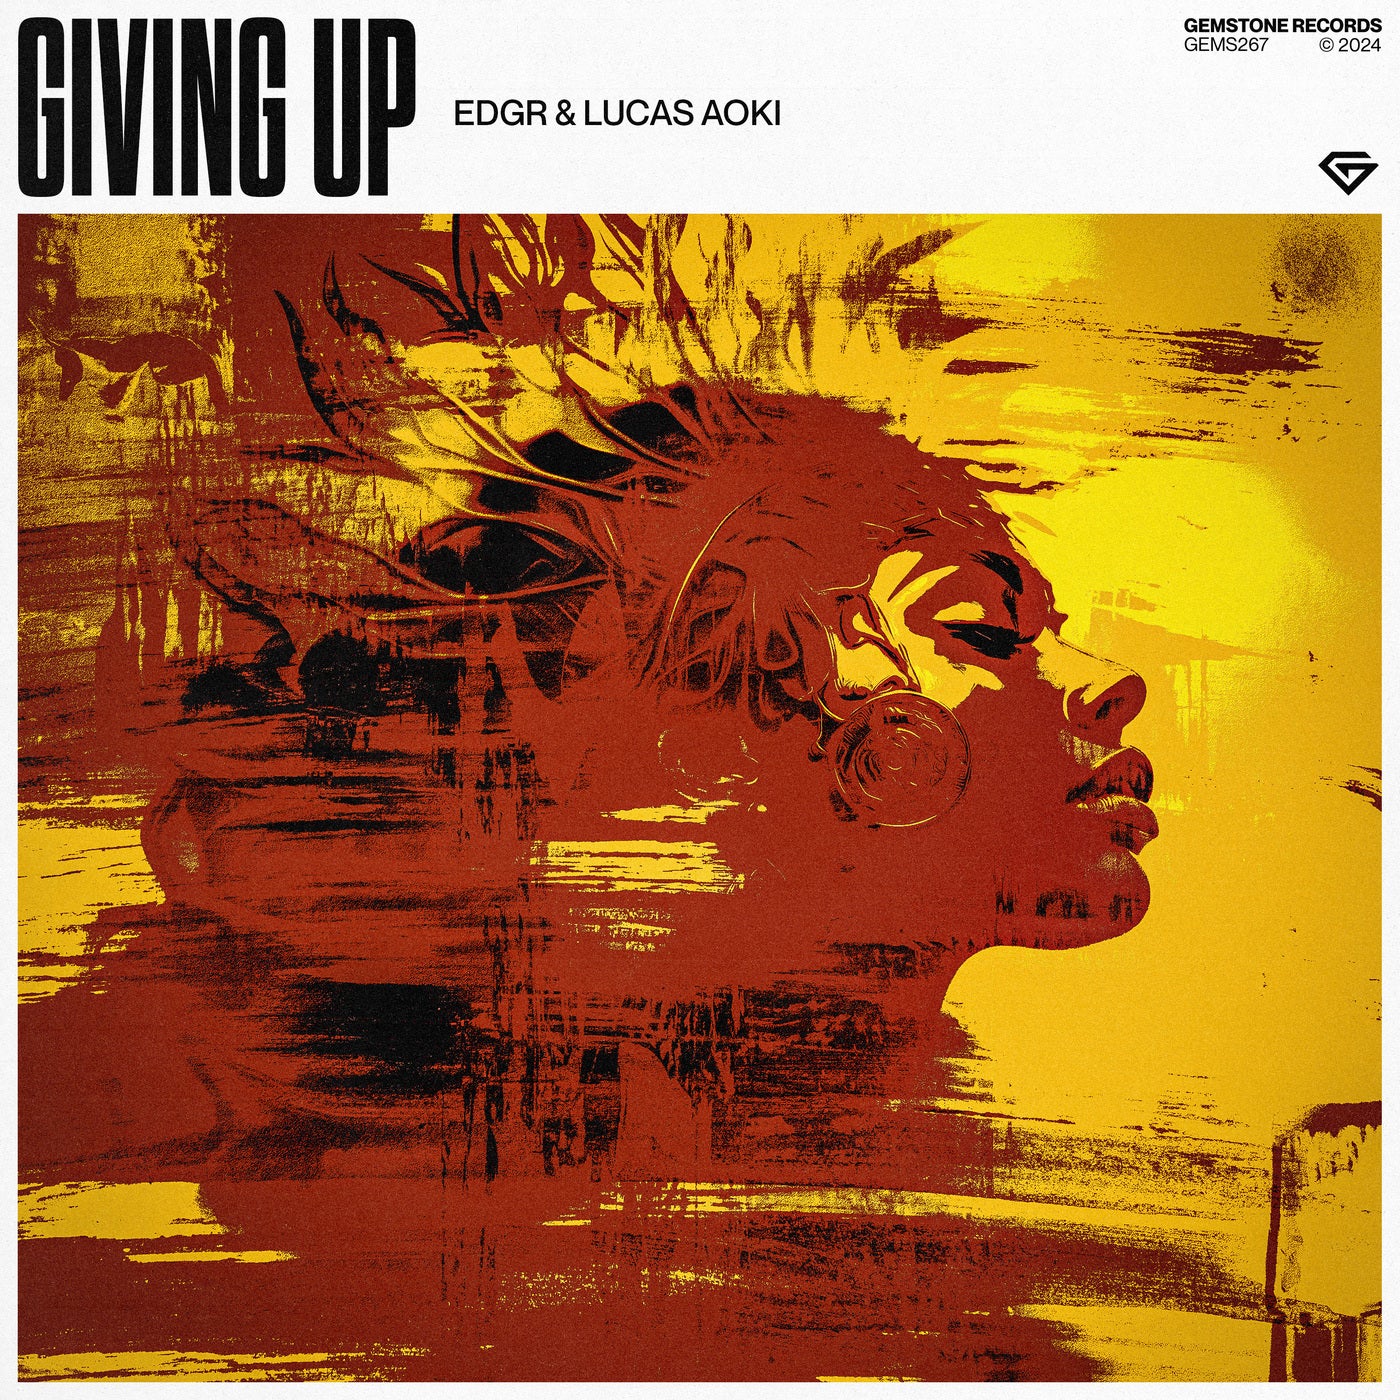 image cover: EDGR, Lucas Aoki - Giving Up on Gemstone Records